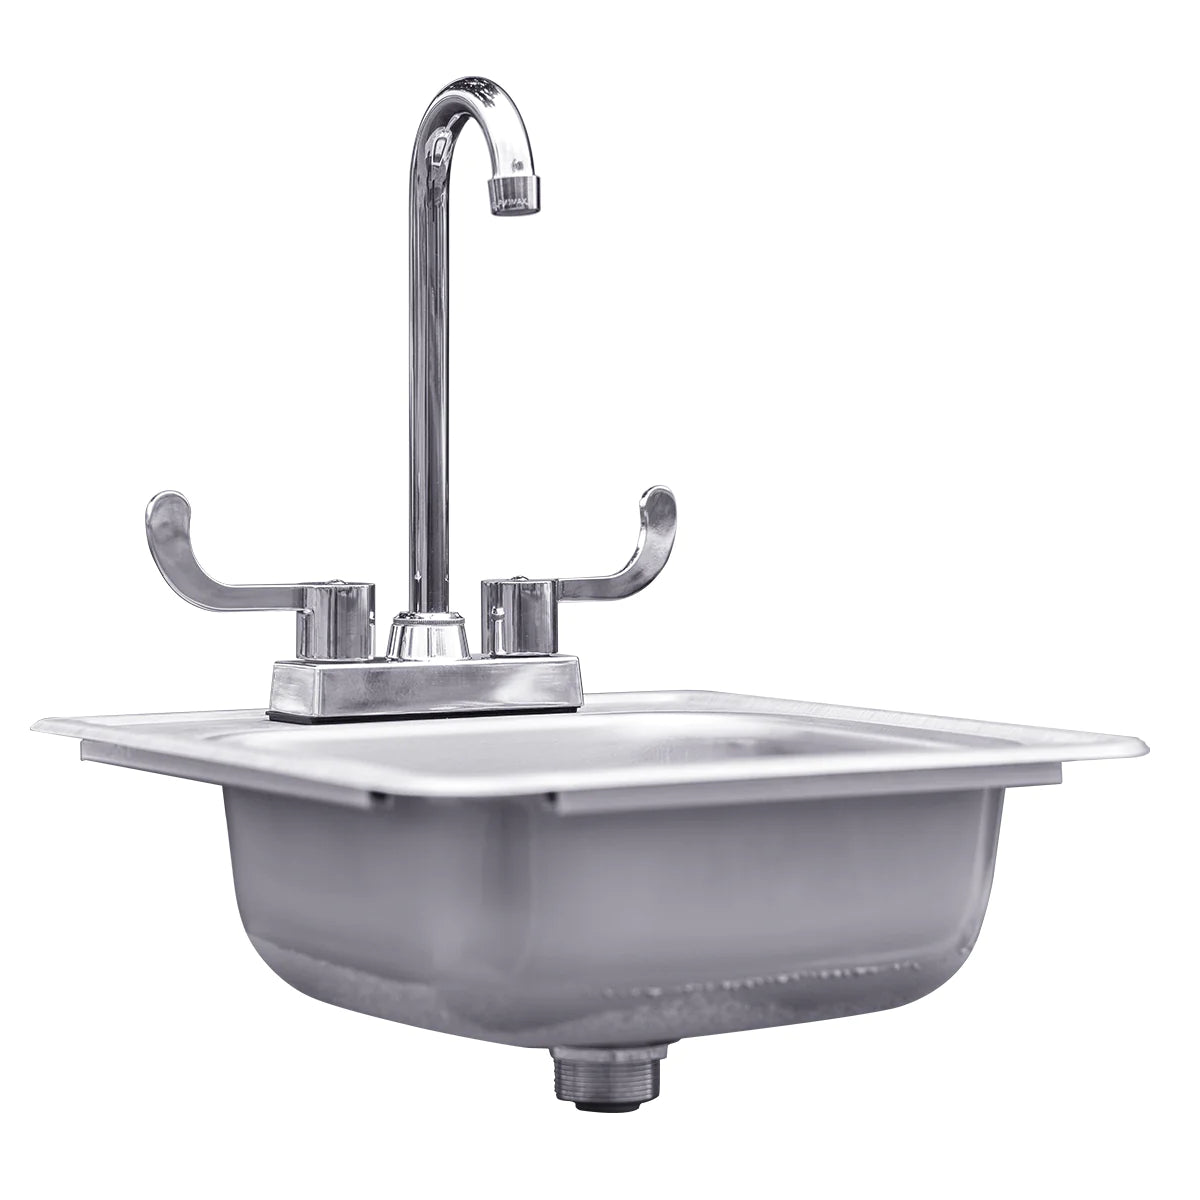 15&quot; Drop-in Sink &amp; Hot/Cold Faucet